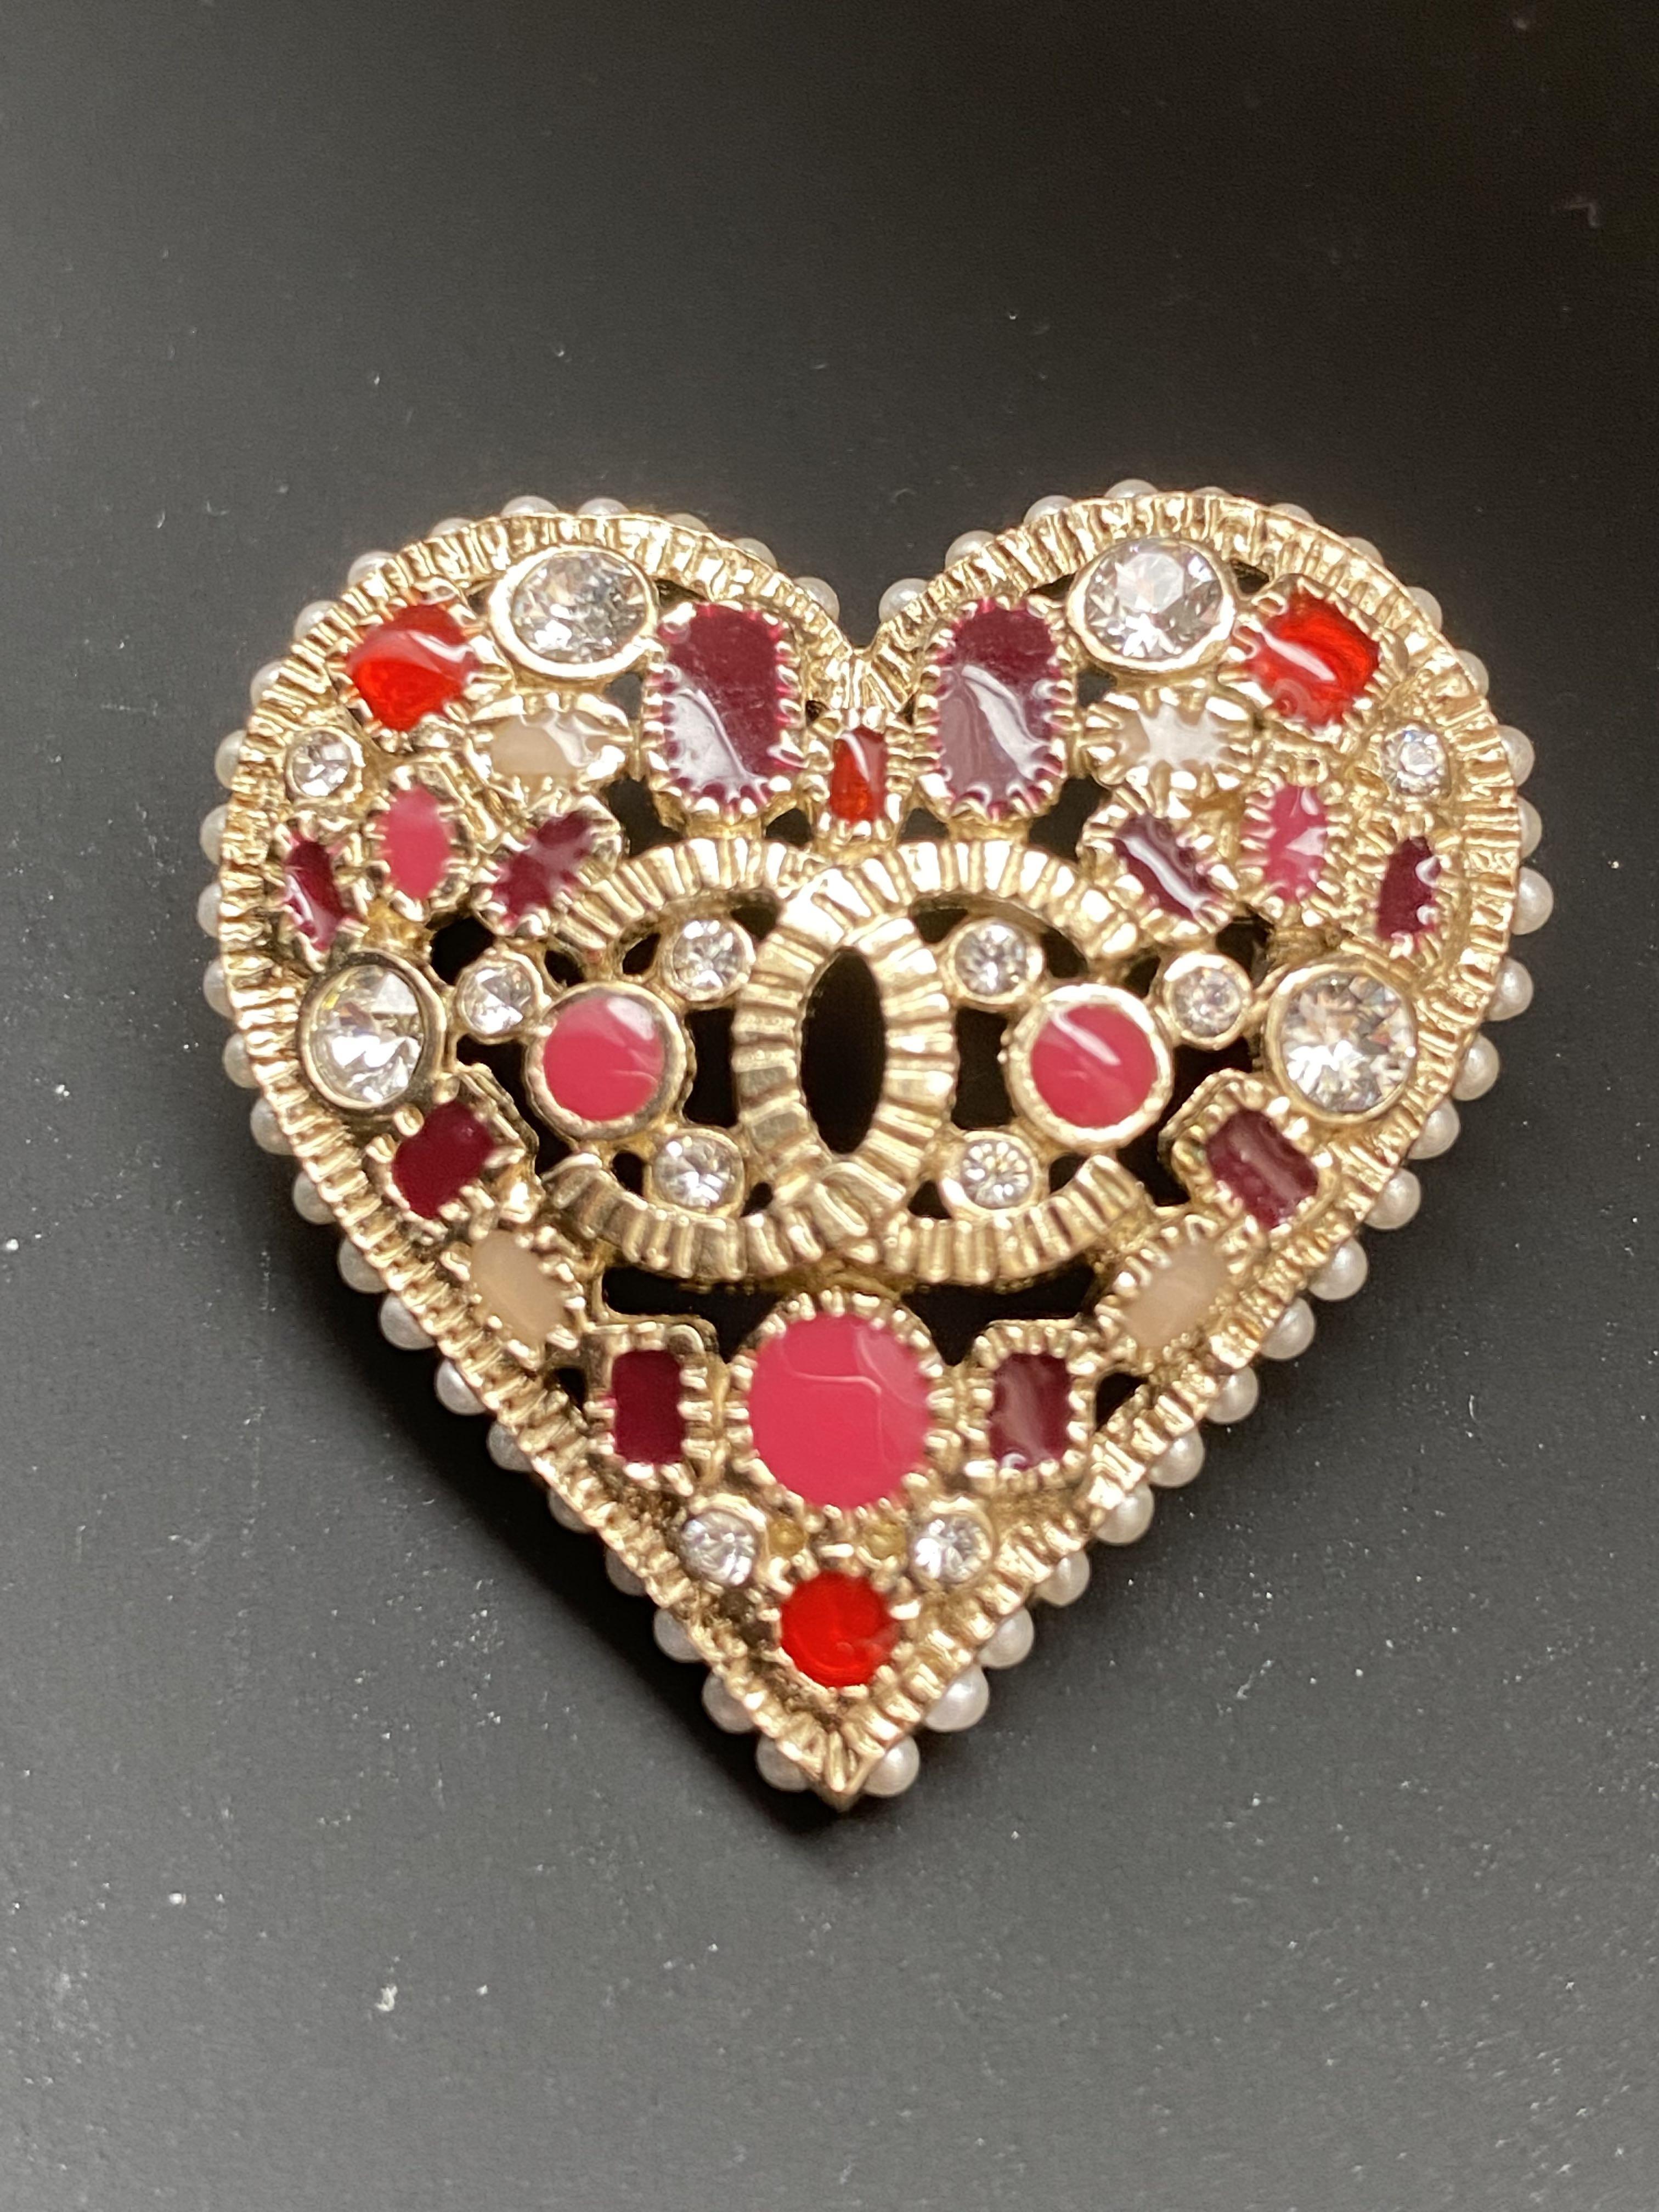 Lot - Coco Chanel 1940s large heart shaped dimensional brooch with black  center framed with pink teardrop glass jewels and faux pearls, unsigned.  3H x 3W